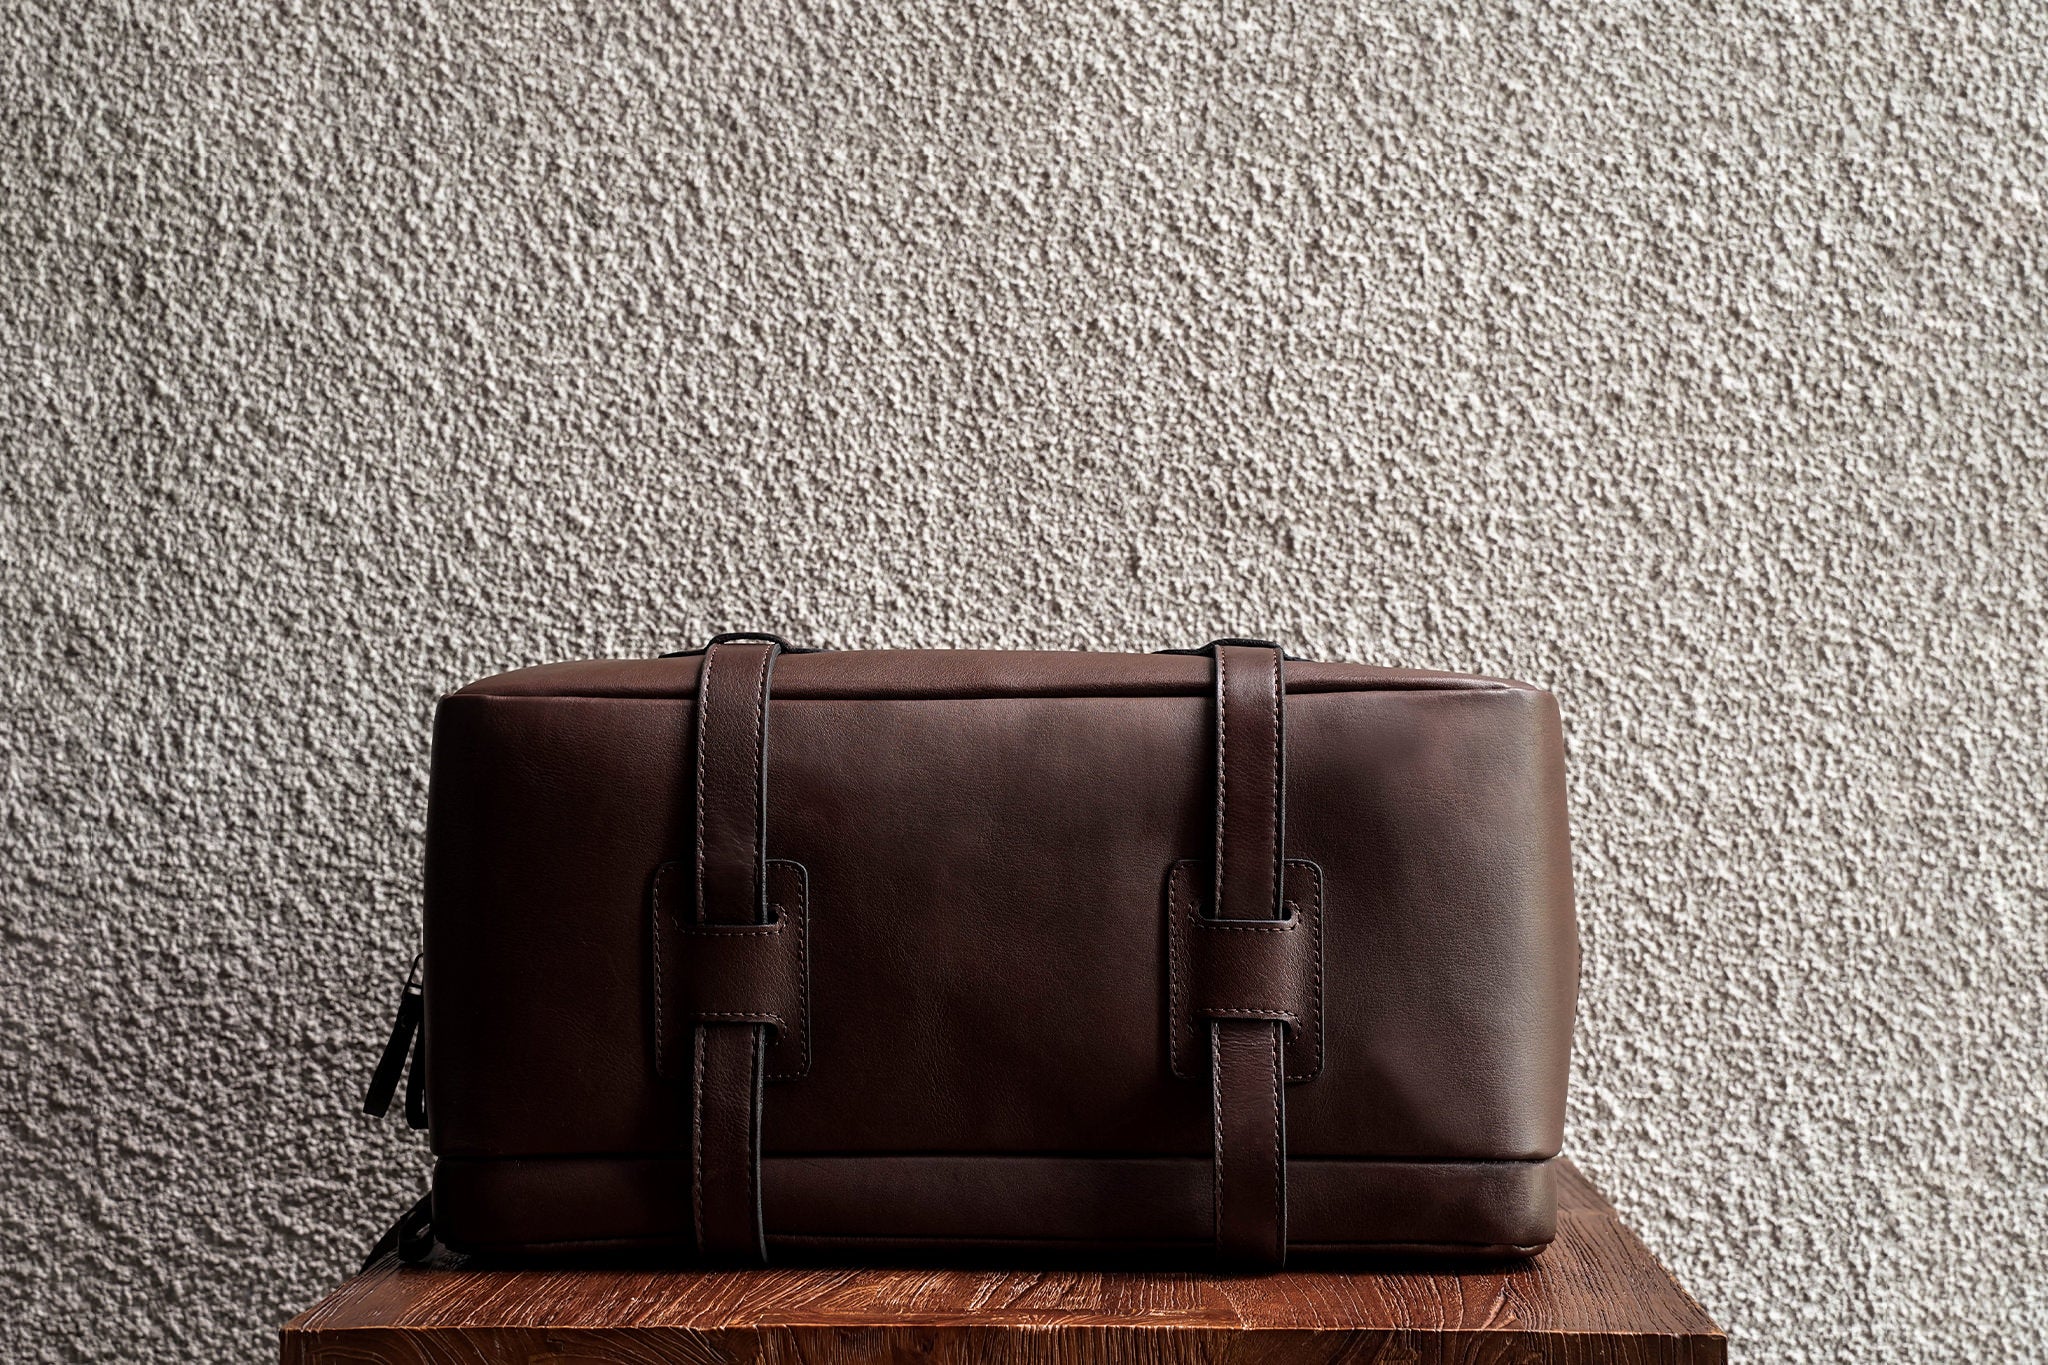 One of our signature design cues, the body straps go all around the bag, providing a load bearing structure for the bag. A big piece of leather on the bottom adds to the durability of the bag.